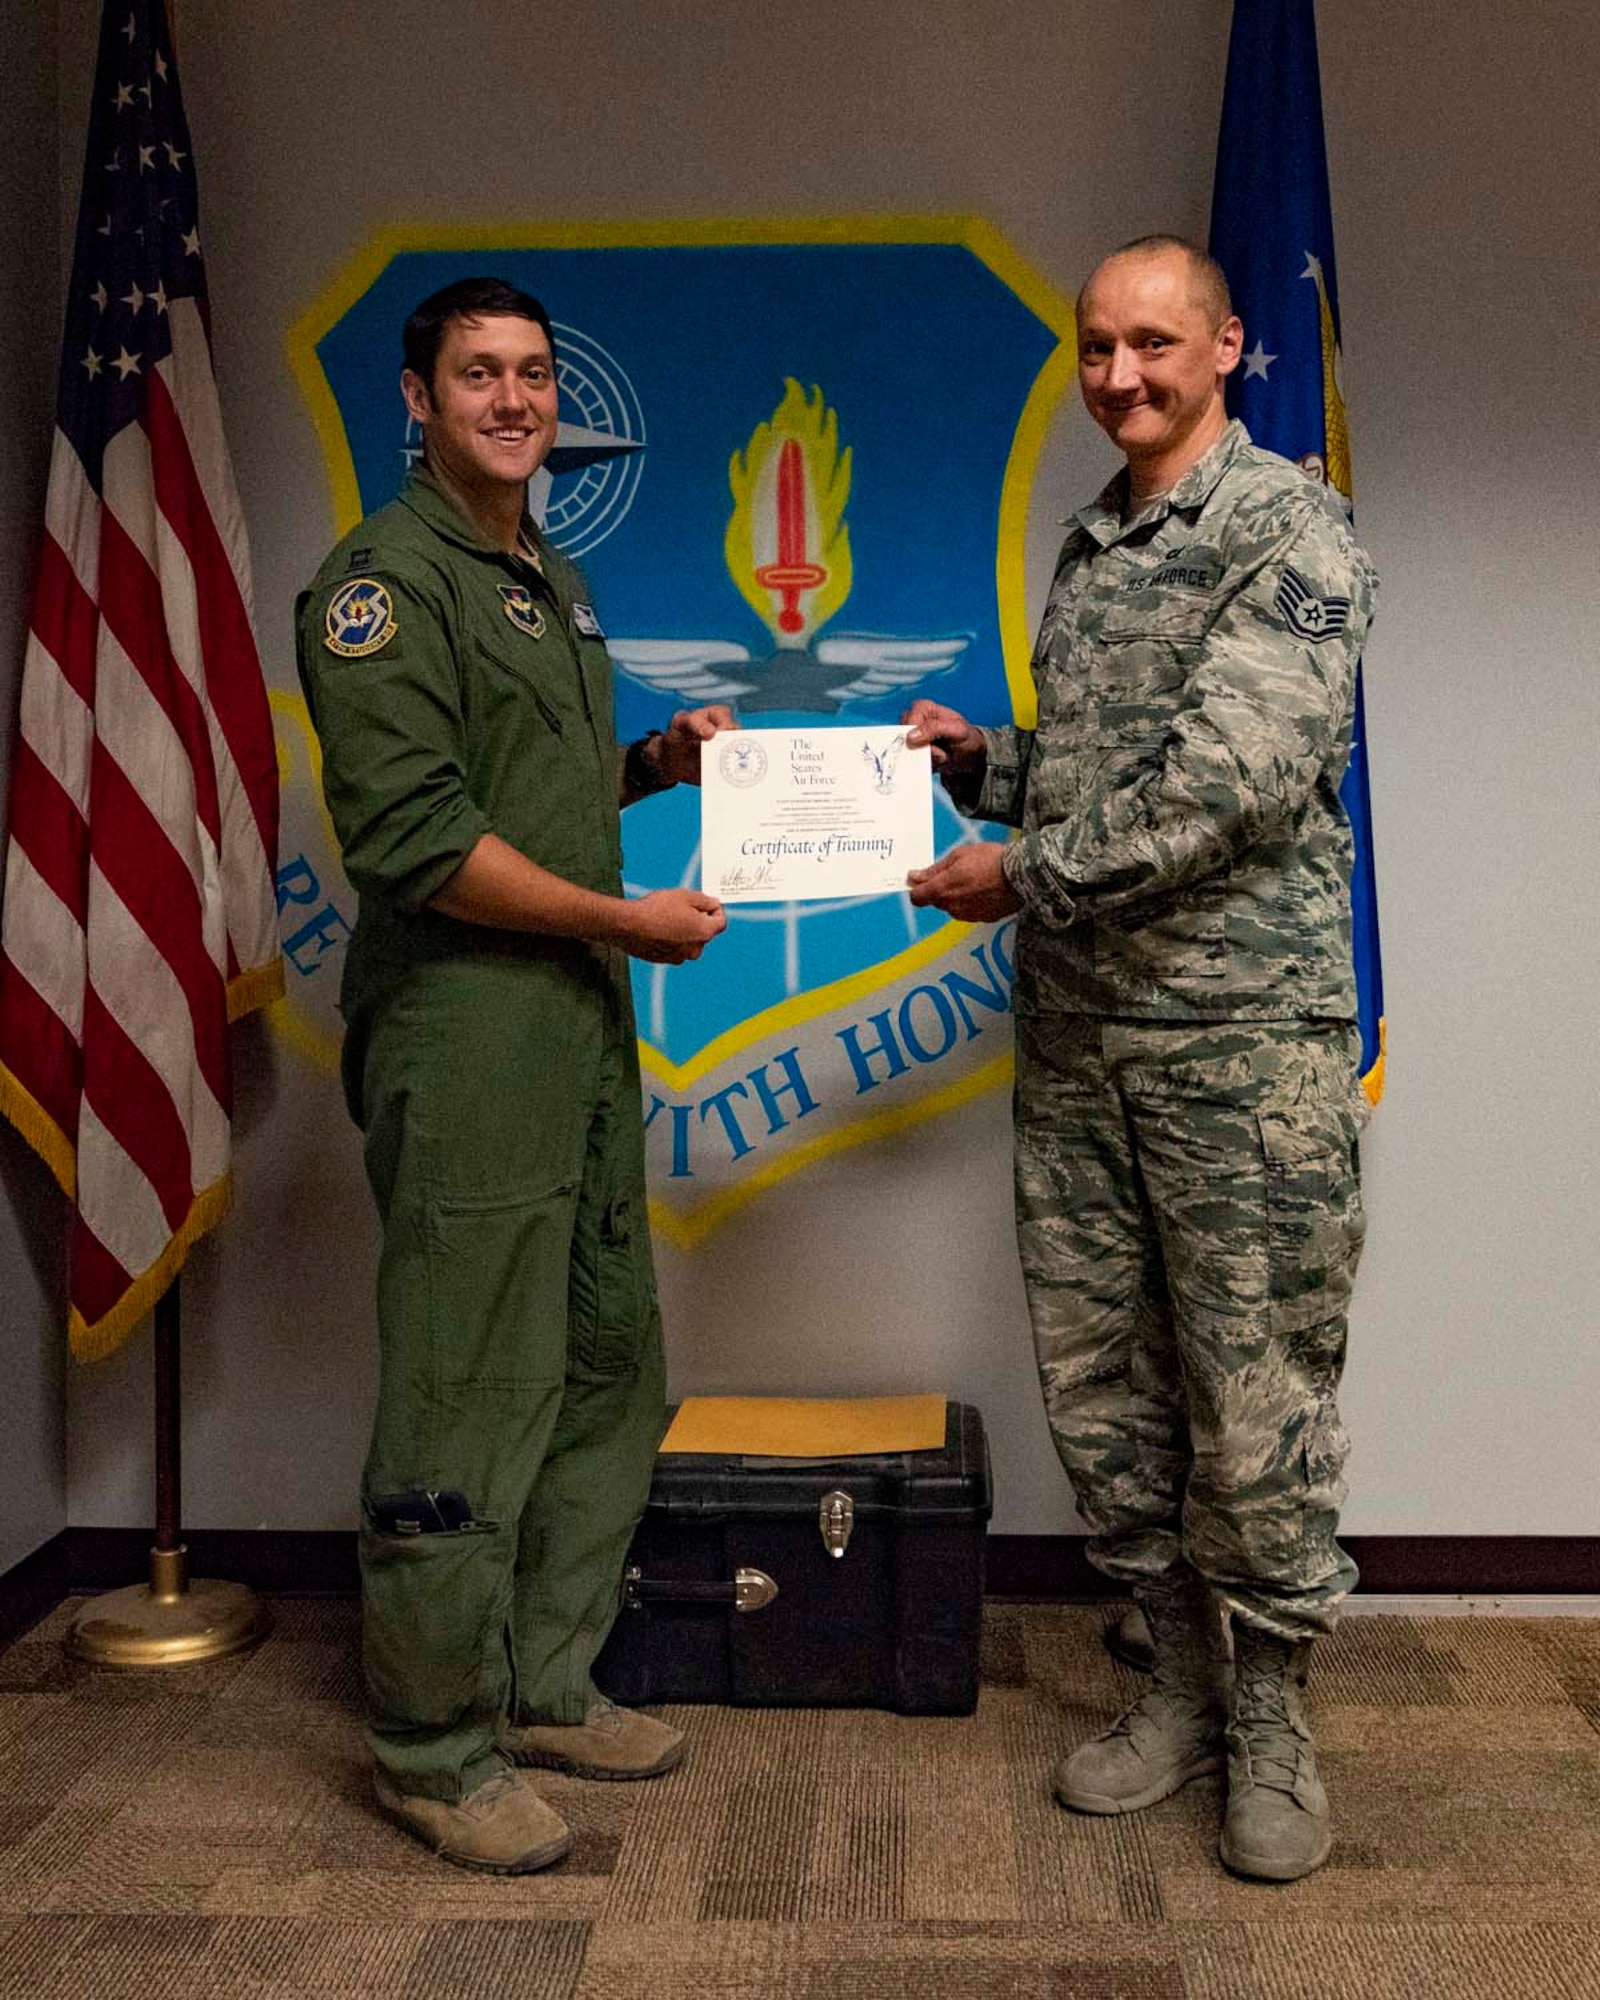 Staff Sgt. Mikhail Scheglov, a finance technician with the 141st Comptroller Flight, poses with Capt. Ryan Adams, a pilot with the 58th Training Squadron, during their graduation ceremony upon completing the Survival, Evasion, Resistance and Escape SV-80A combat survival training course. Scheglov completed several SERE training courses in preparation for a trip to Vinnytsia Air Base, Ukraine, in which he served as a translator during exercise Clear Sky 2018.  (U.S. Air National Guard photo by Staff Sgt. Rose M. Lust)